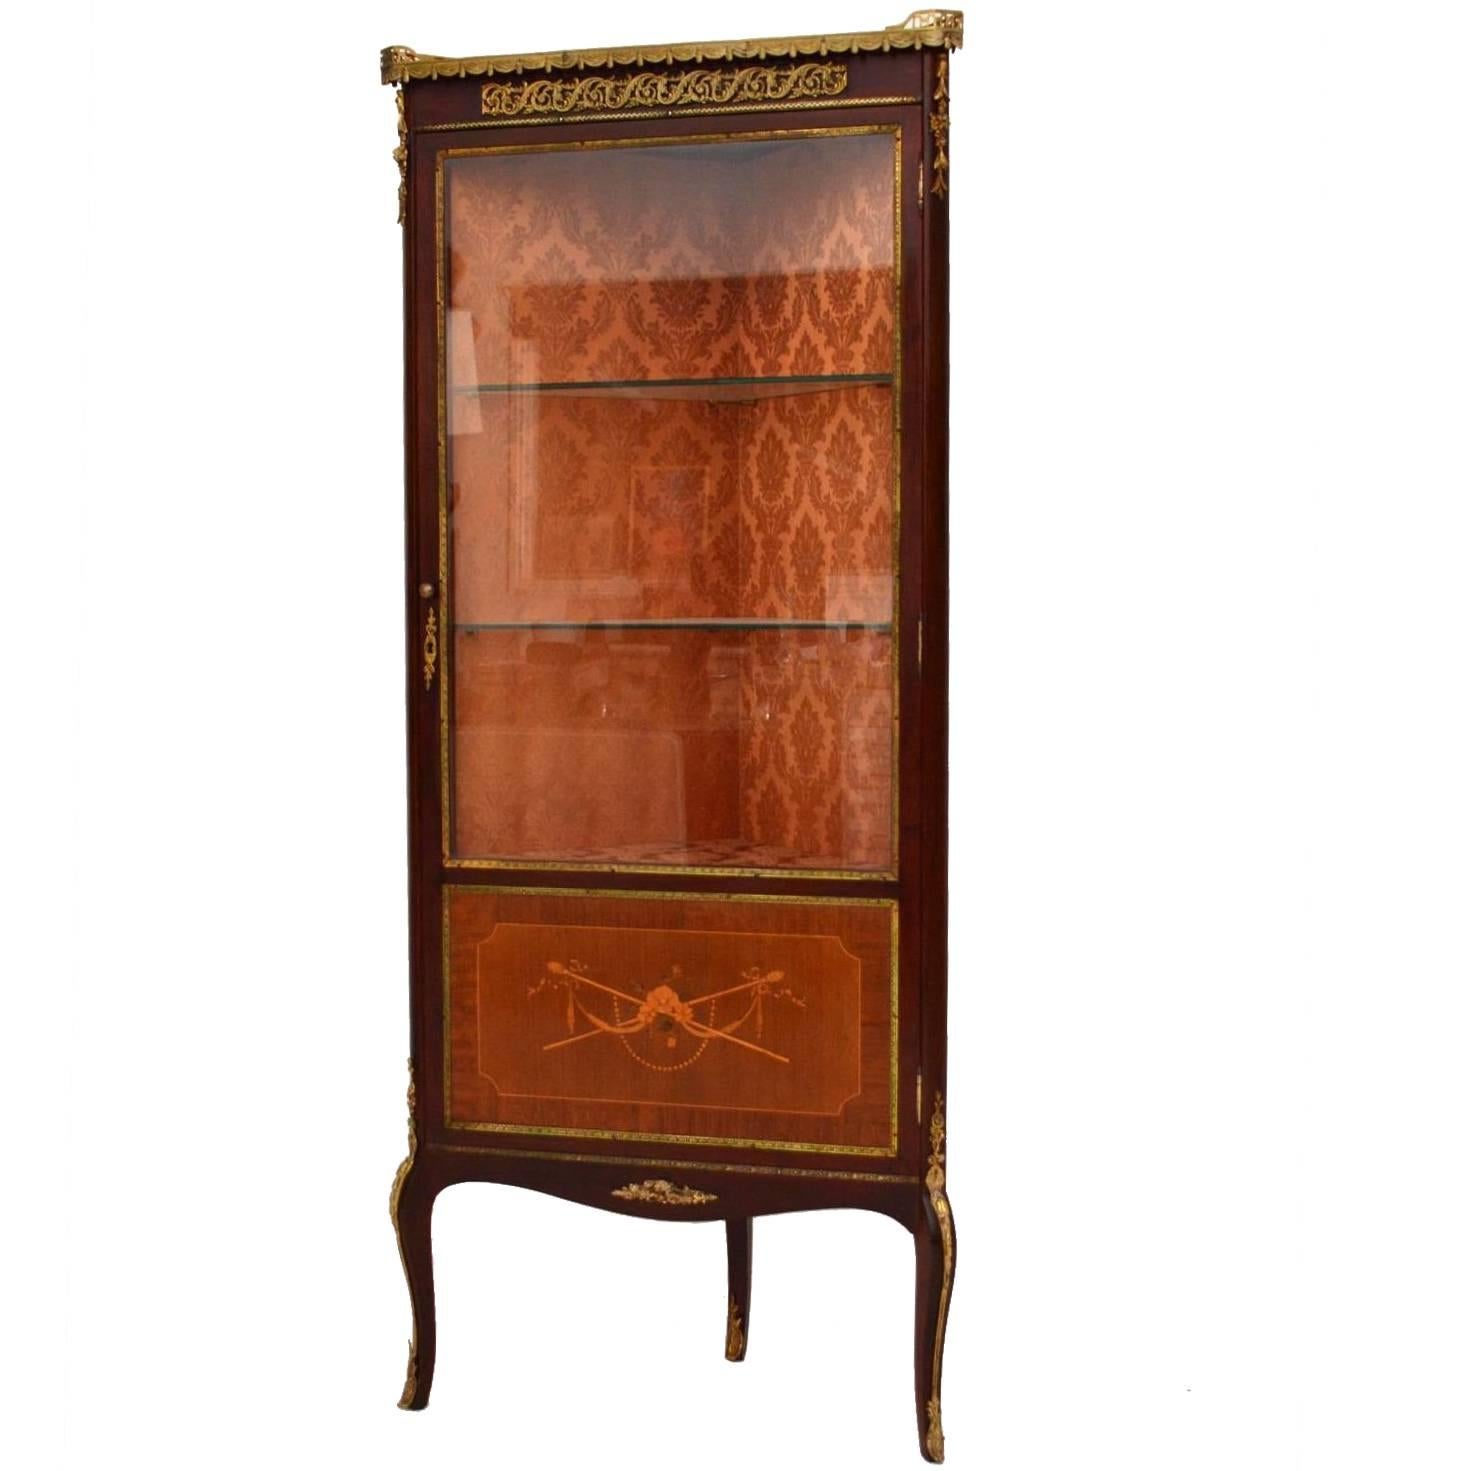 Antique French Ormolu-Mounted Corner Cabinet